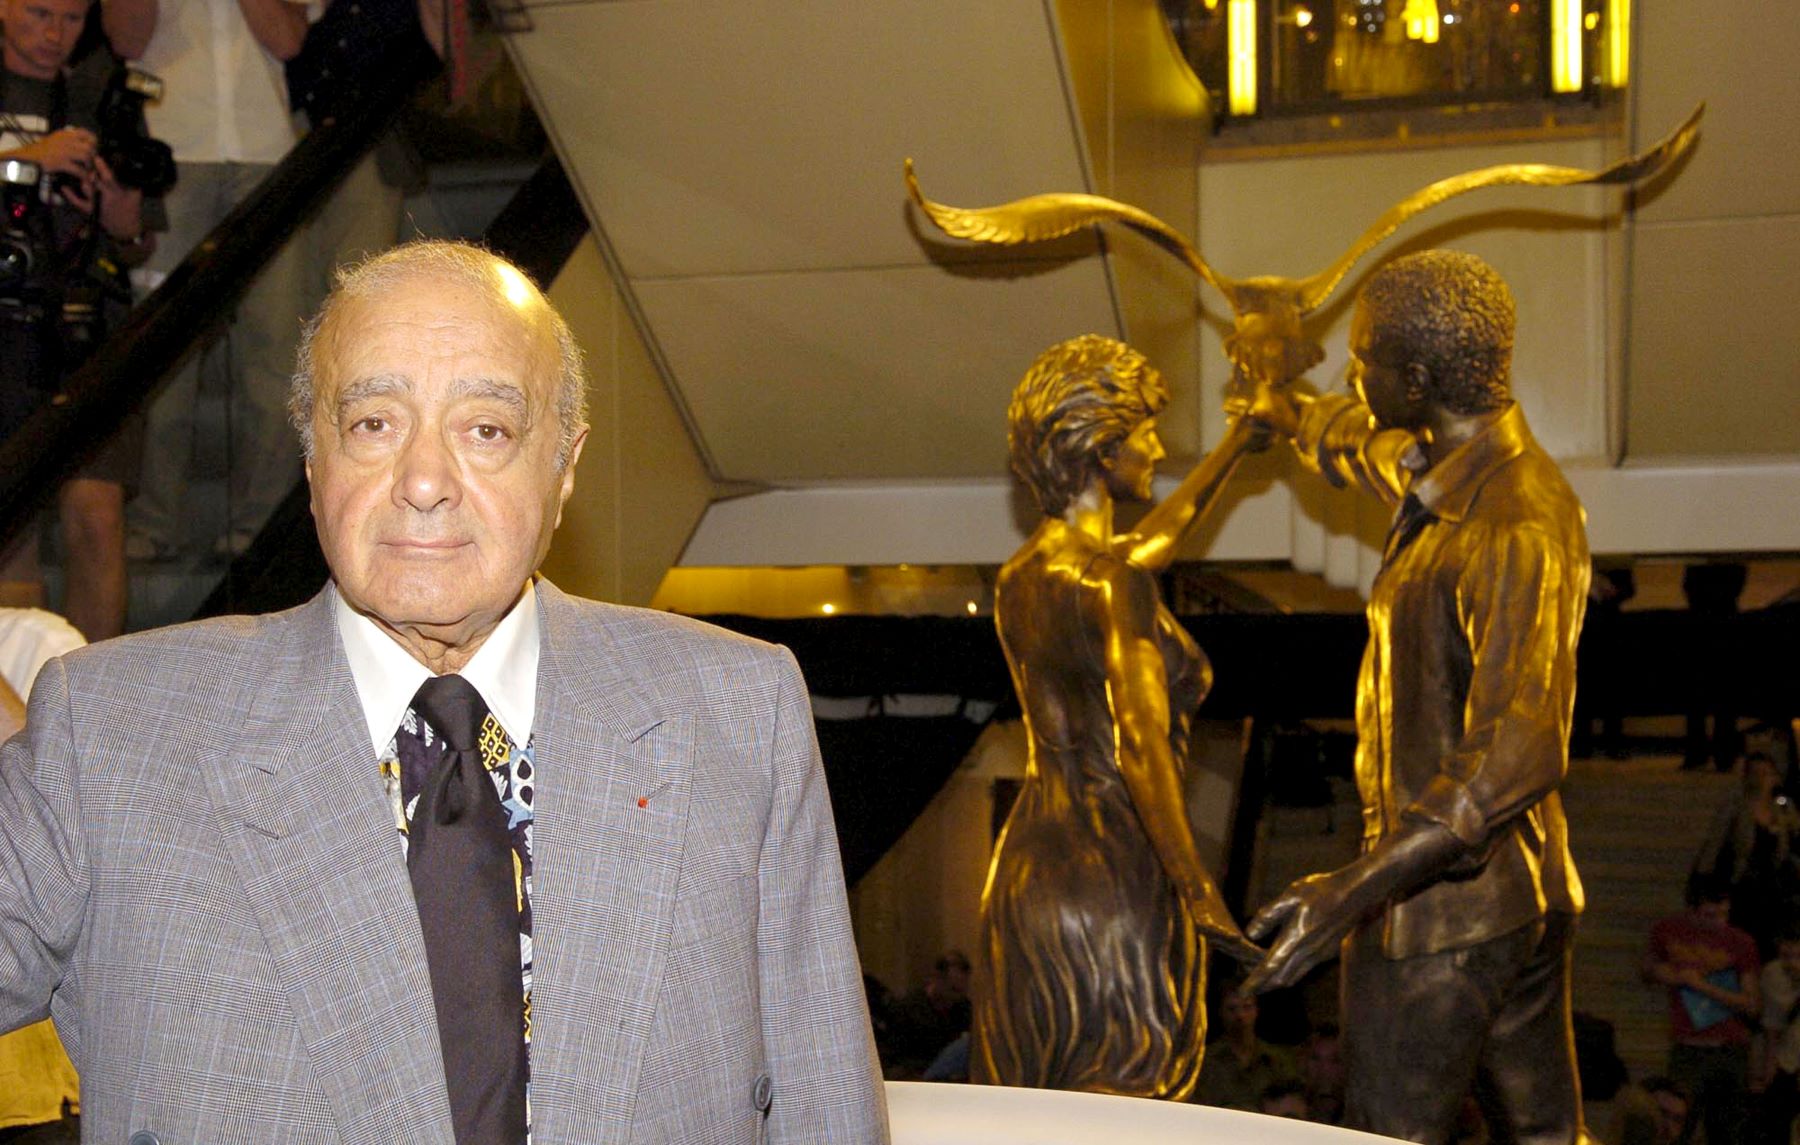 Mohamed Al-Fayed pictured at a memorial for Dodi Al-Fayed and Princess Diana at Harrods in London, U.K.